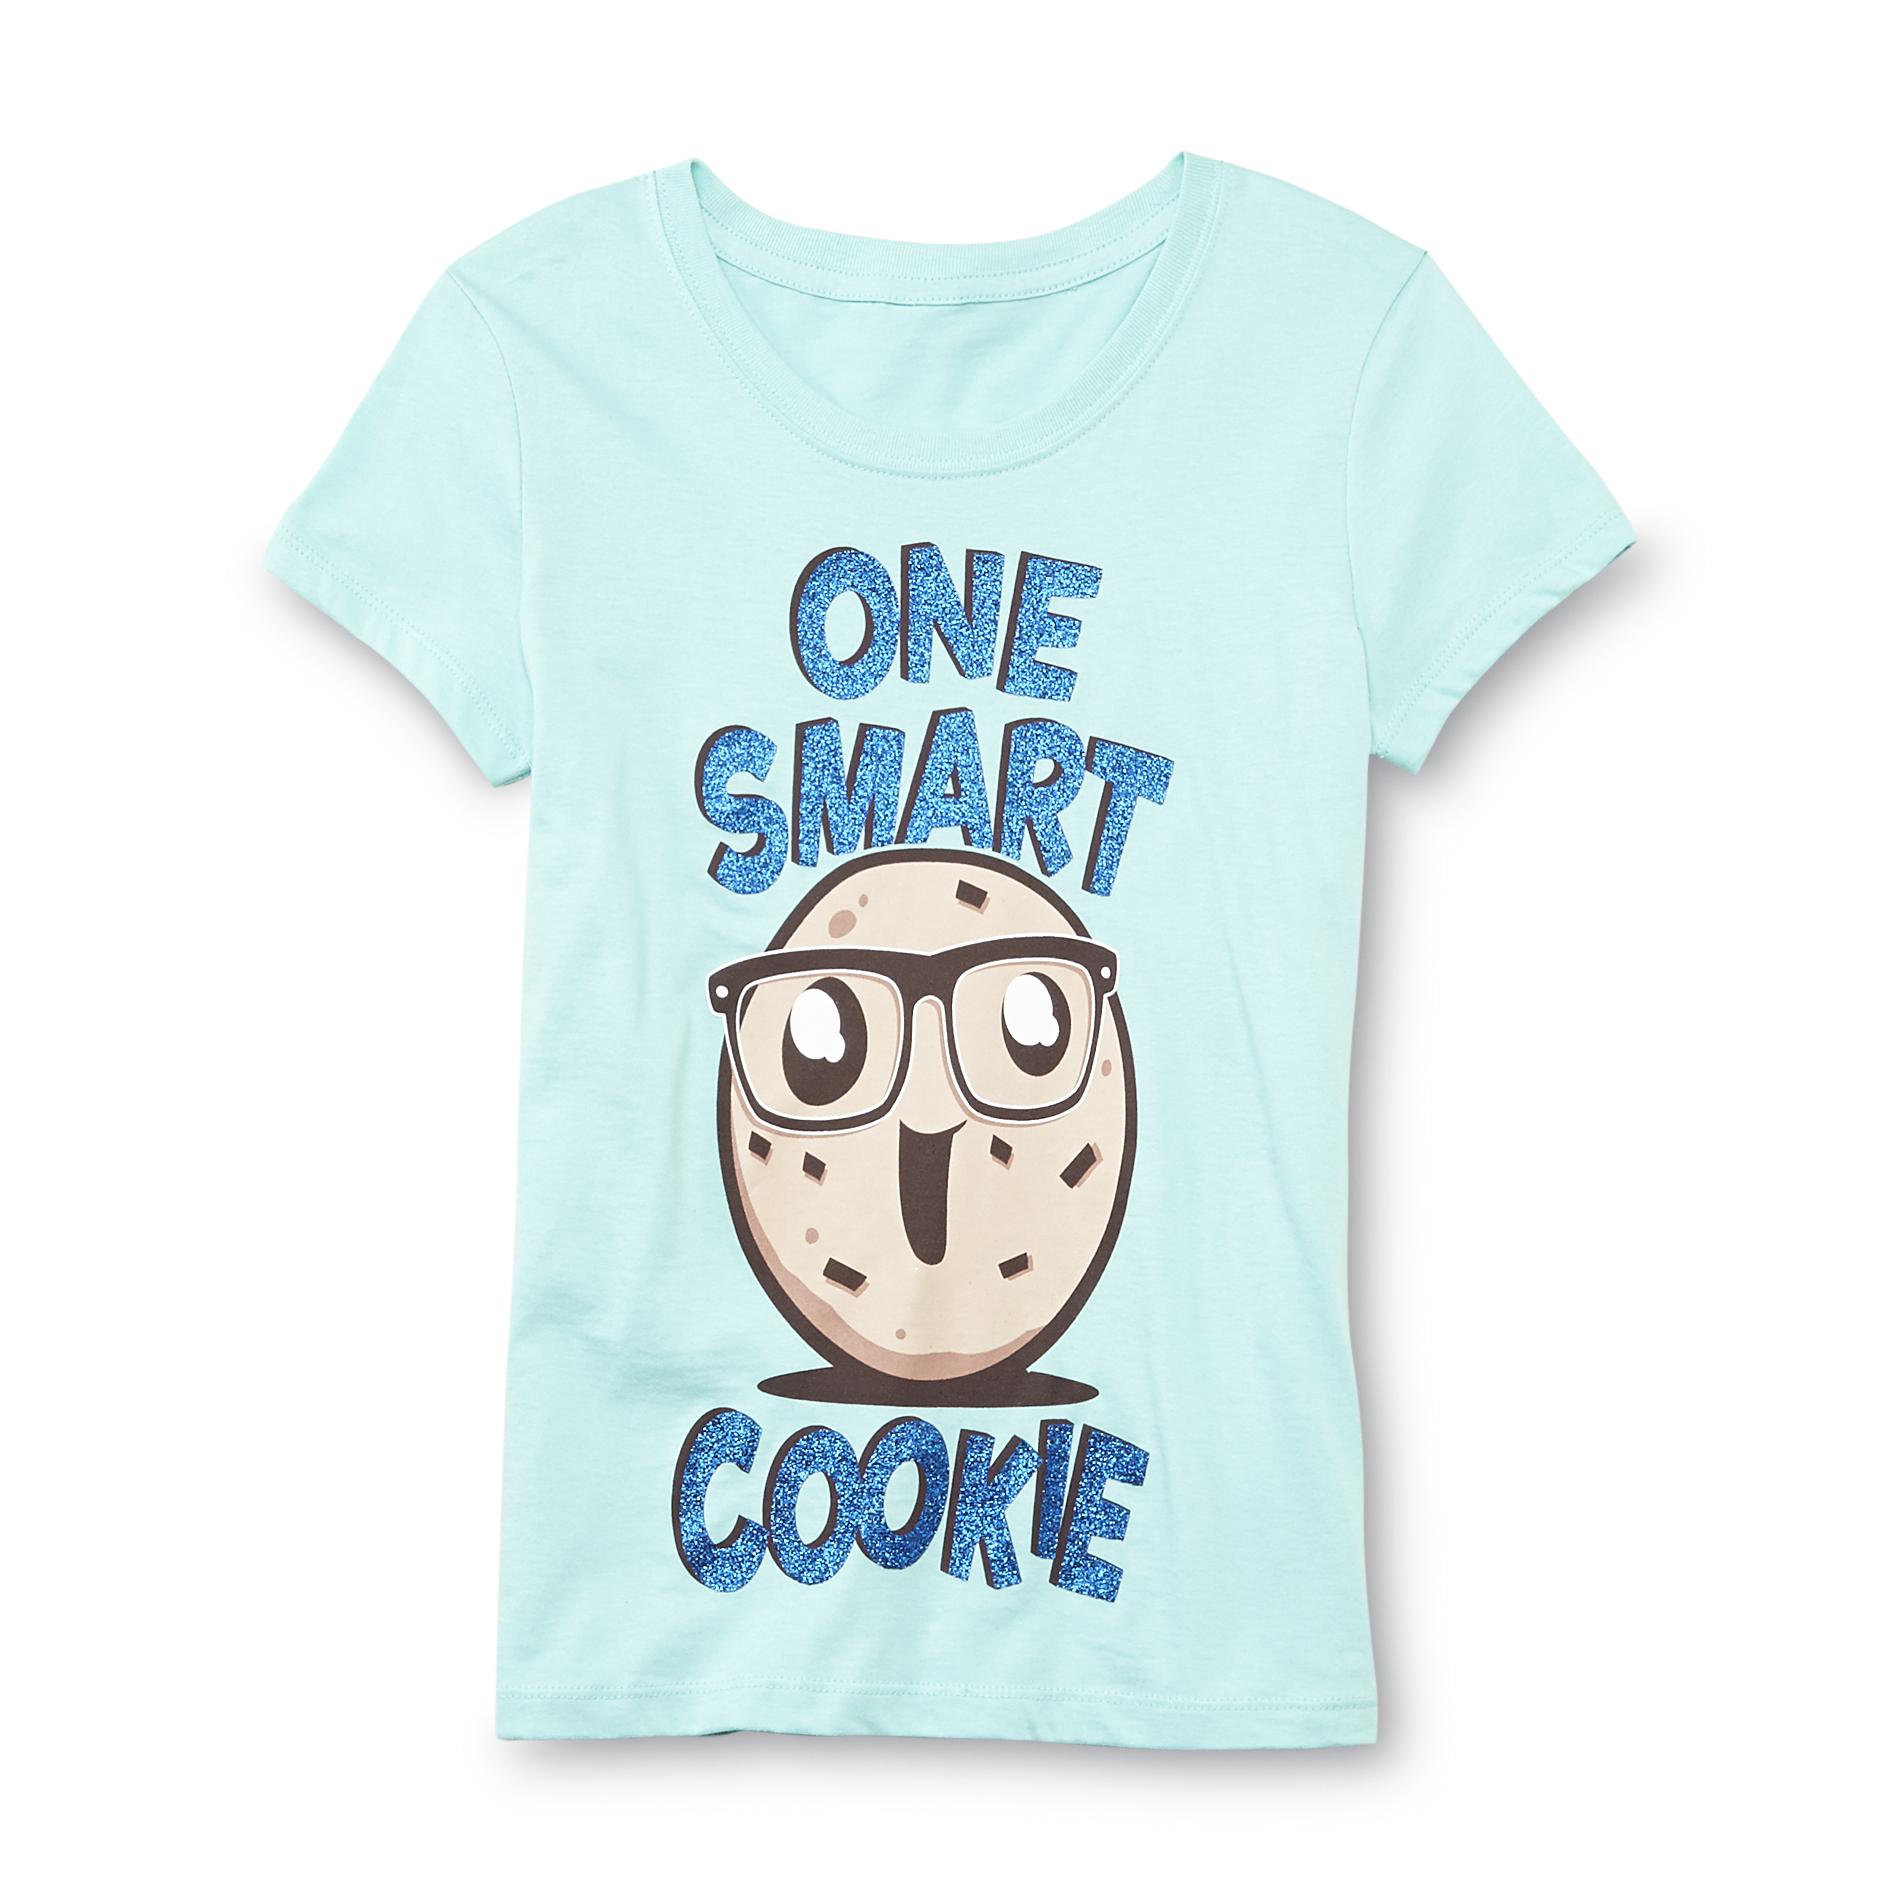 Hybrid Girl's Graphic T-Shirt - Smart Cookie